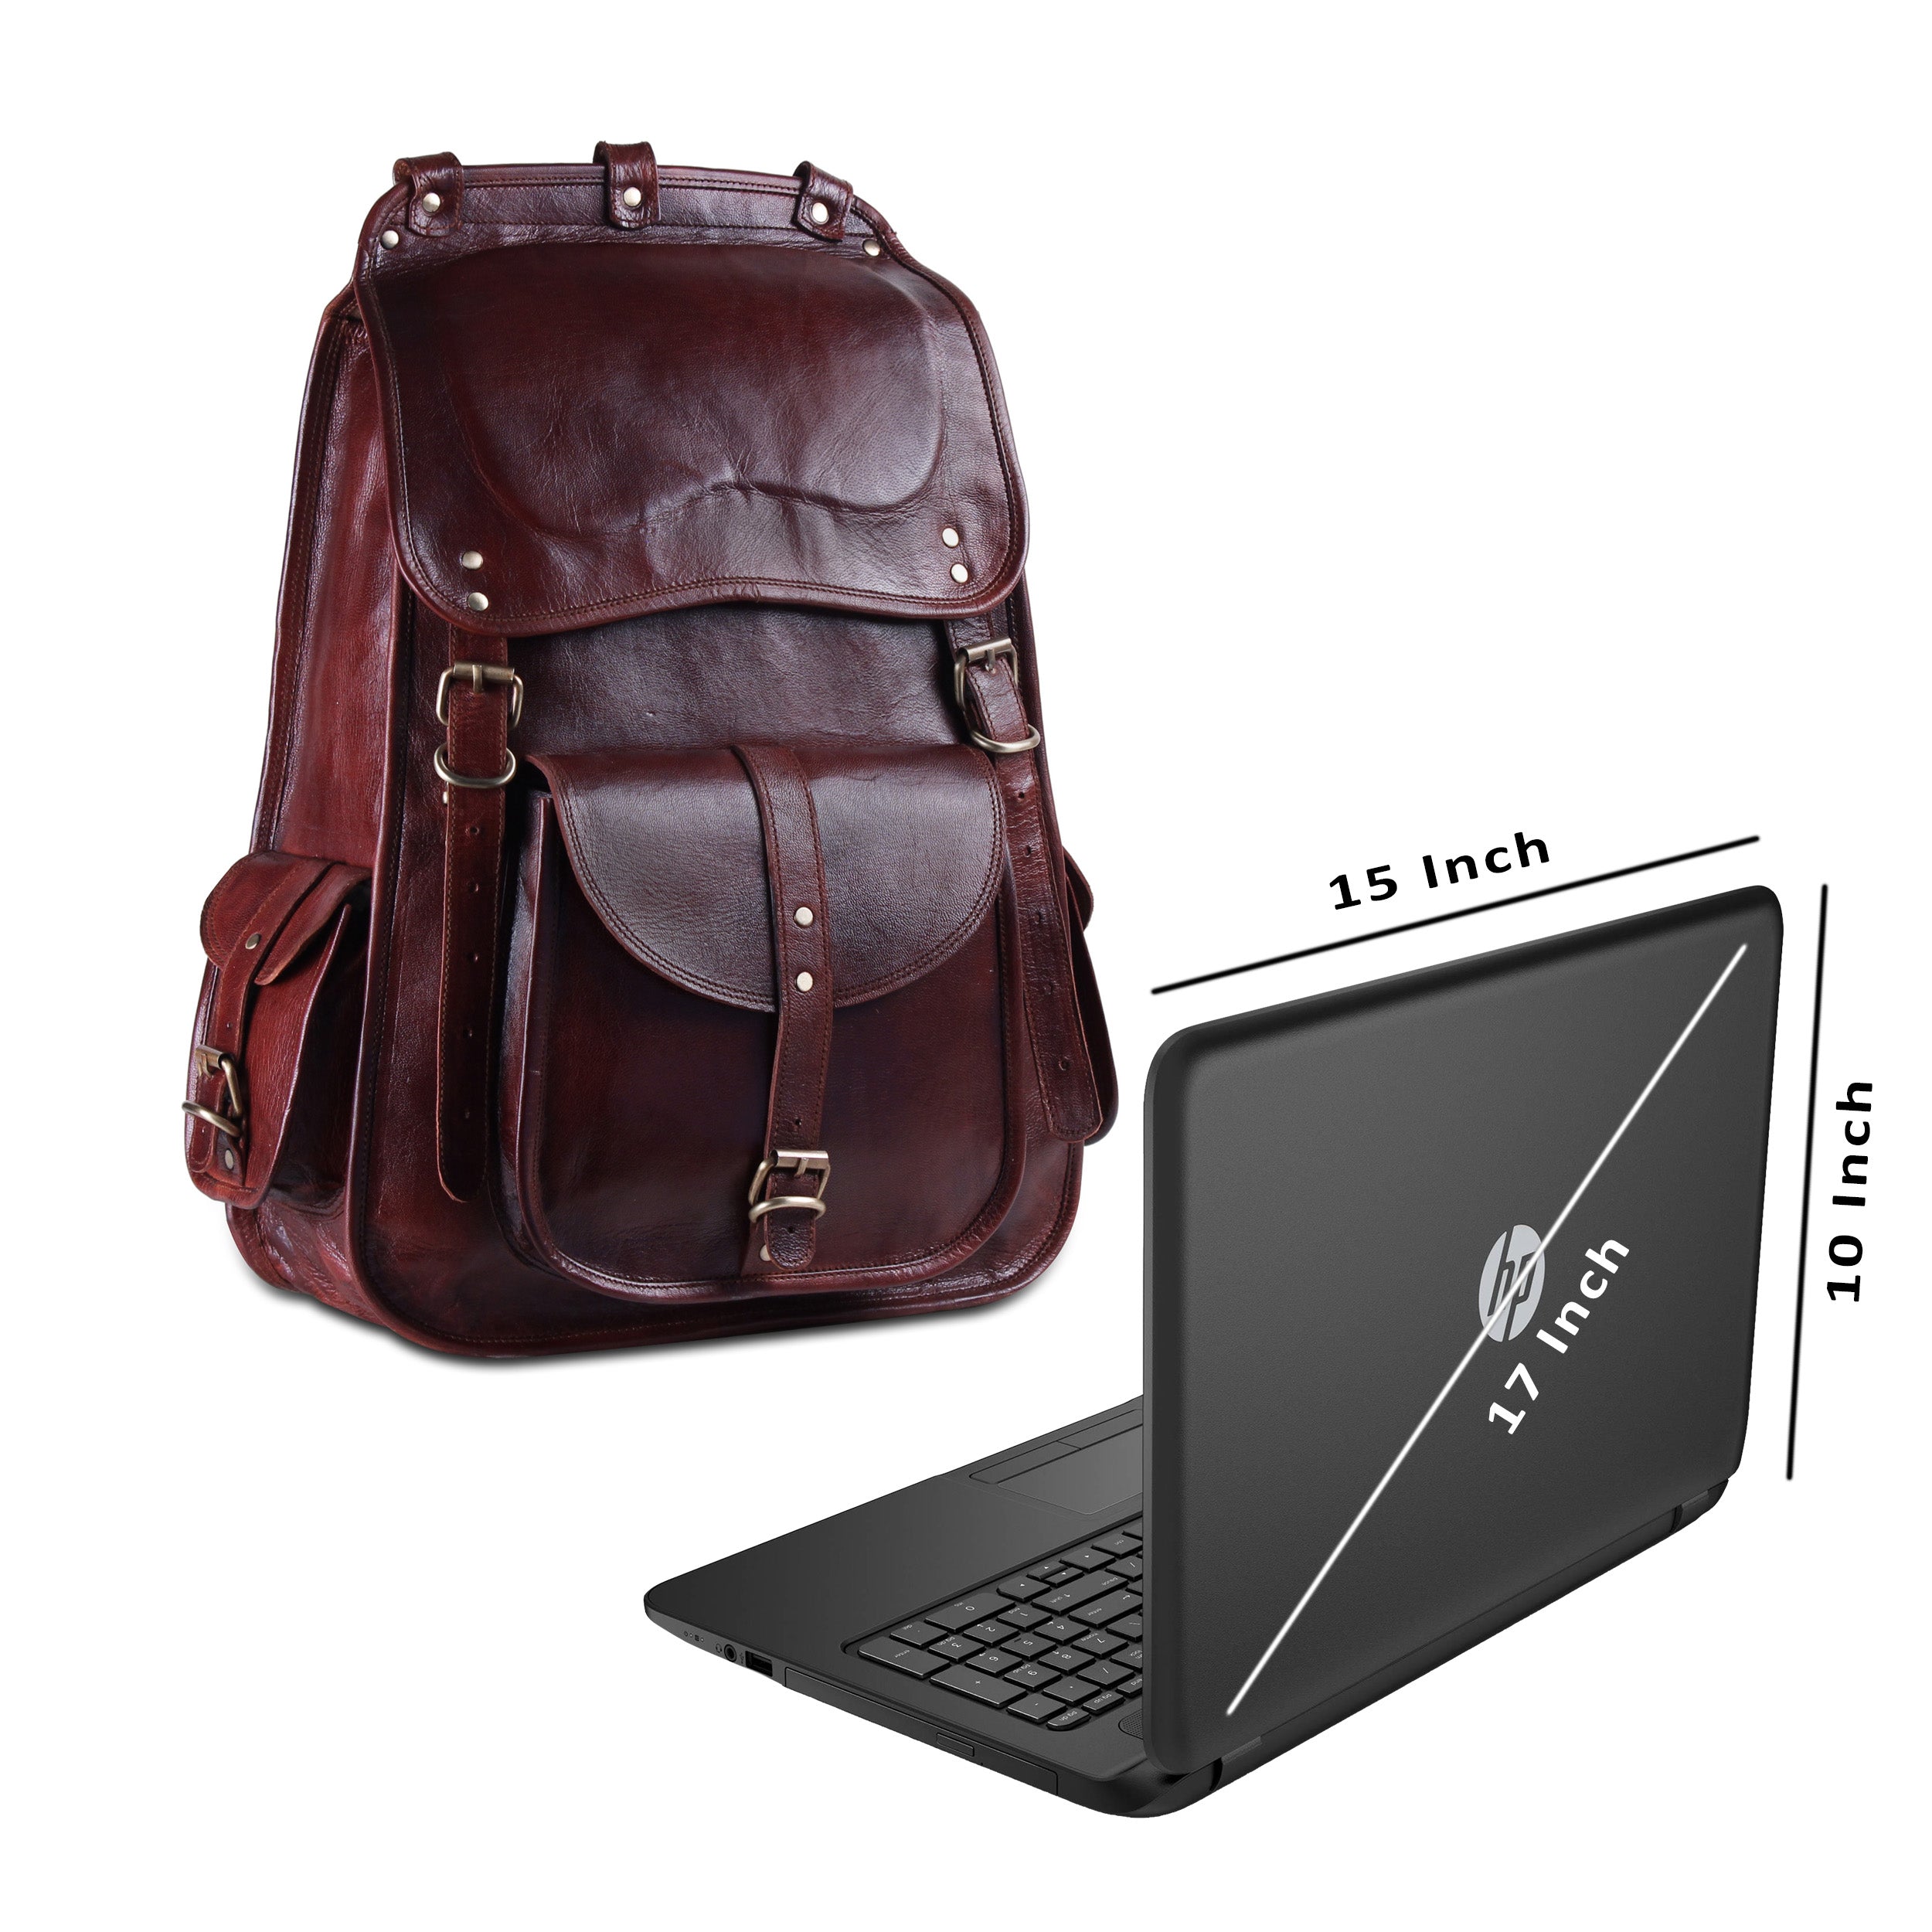 showing the maximum size of the laptop which is 18 inch that can be fit inside the leather backpack